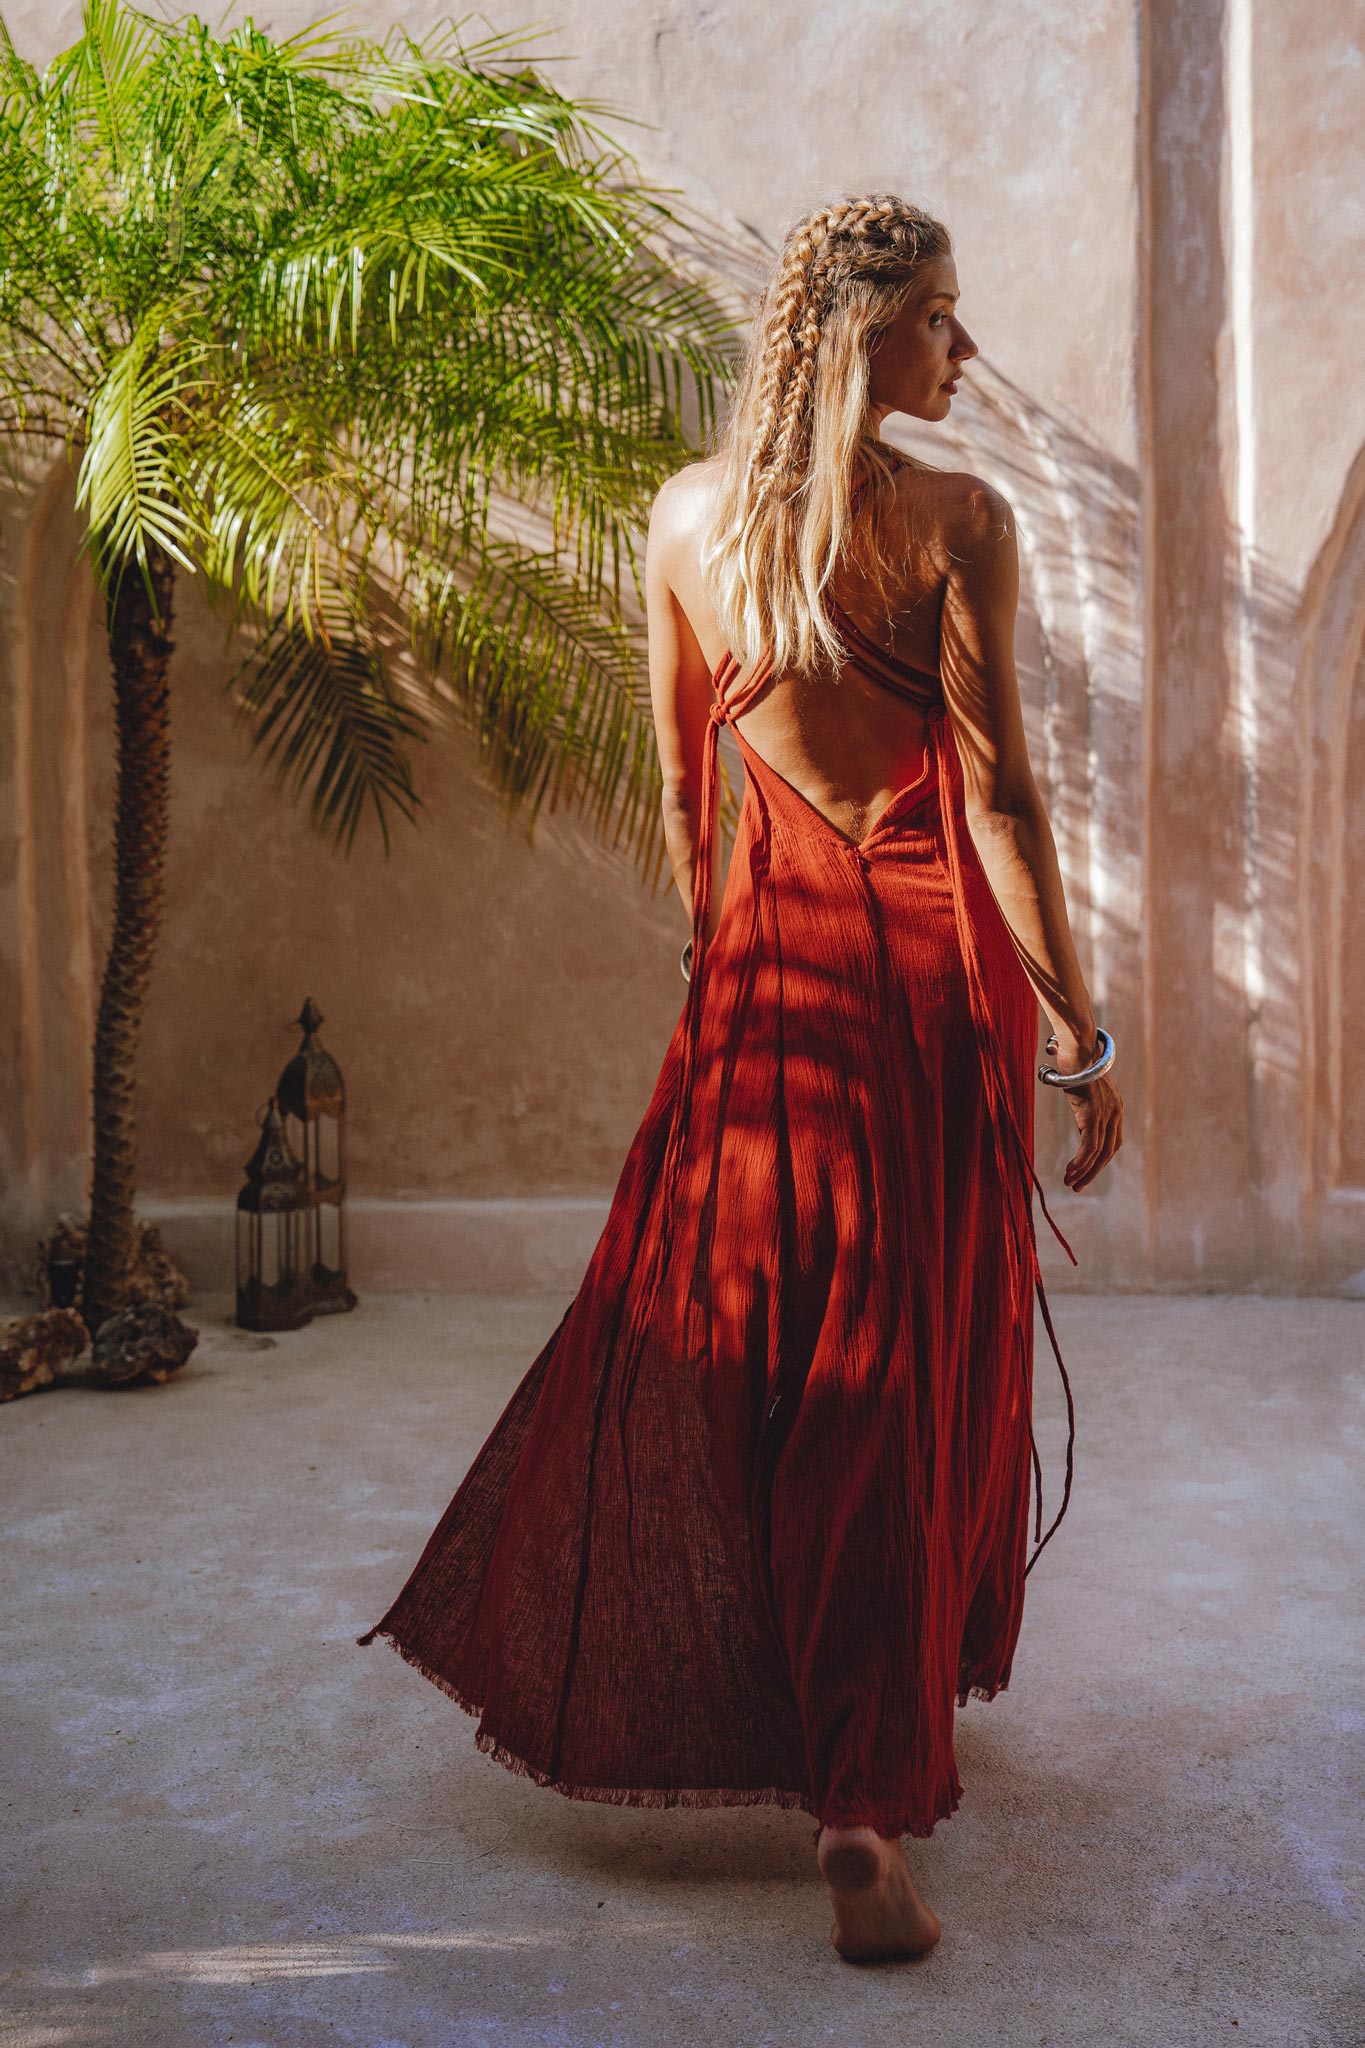 Get Ready for Any Event: Red Wine Goddess Dress from Aya Sacred Wear 